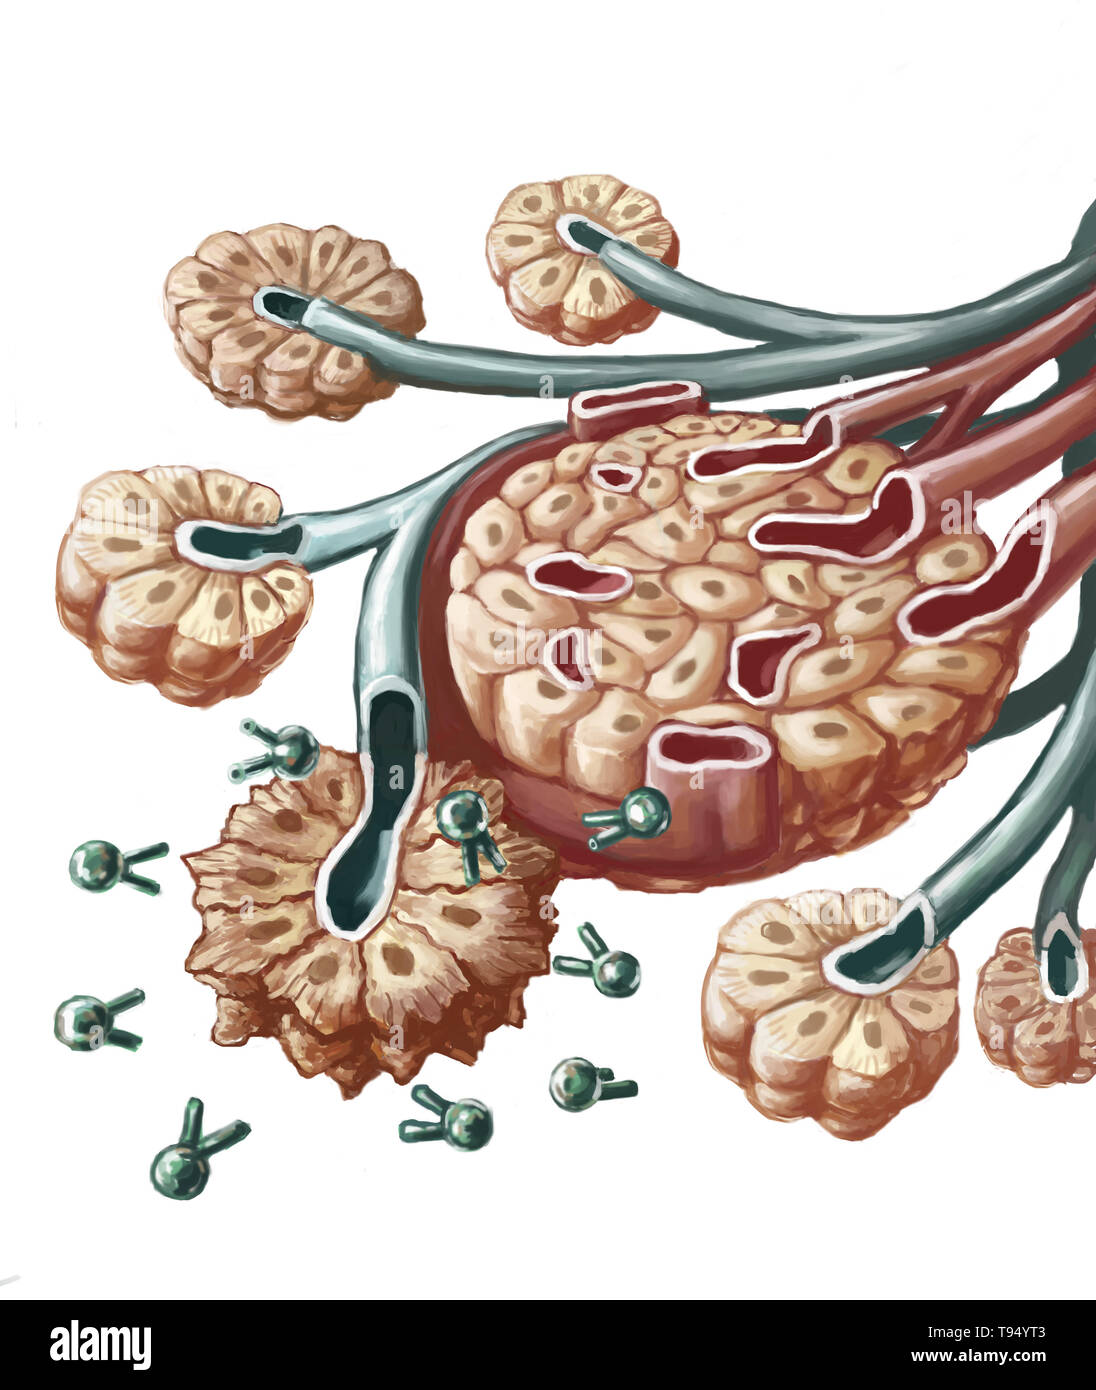 Illustration of radioimmunotherapy used to treat pancreatic cancer. A radioactive isotope (lead-212) is combined with a specific antibody capable of targeting cancerous cells. This combination of antibody and lead-212 radioisotope is injected intravenously into the body until it reaches the pancreas where it locks onto the cancerous cells' antigen. The lead destroys the cells by irradiating them. This treatment limits the toxicity on healthy cells located near the cancerous cells. Stock Photo